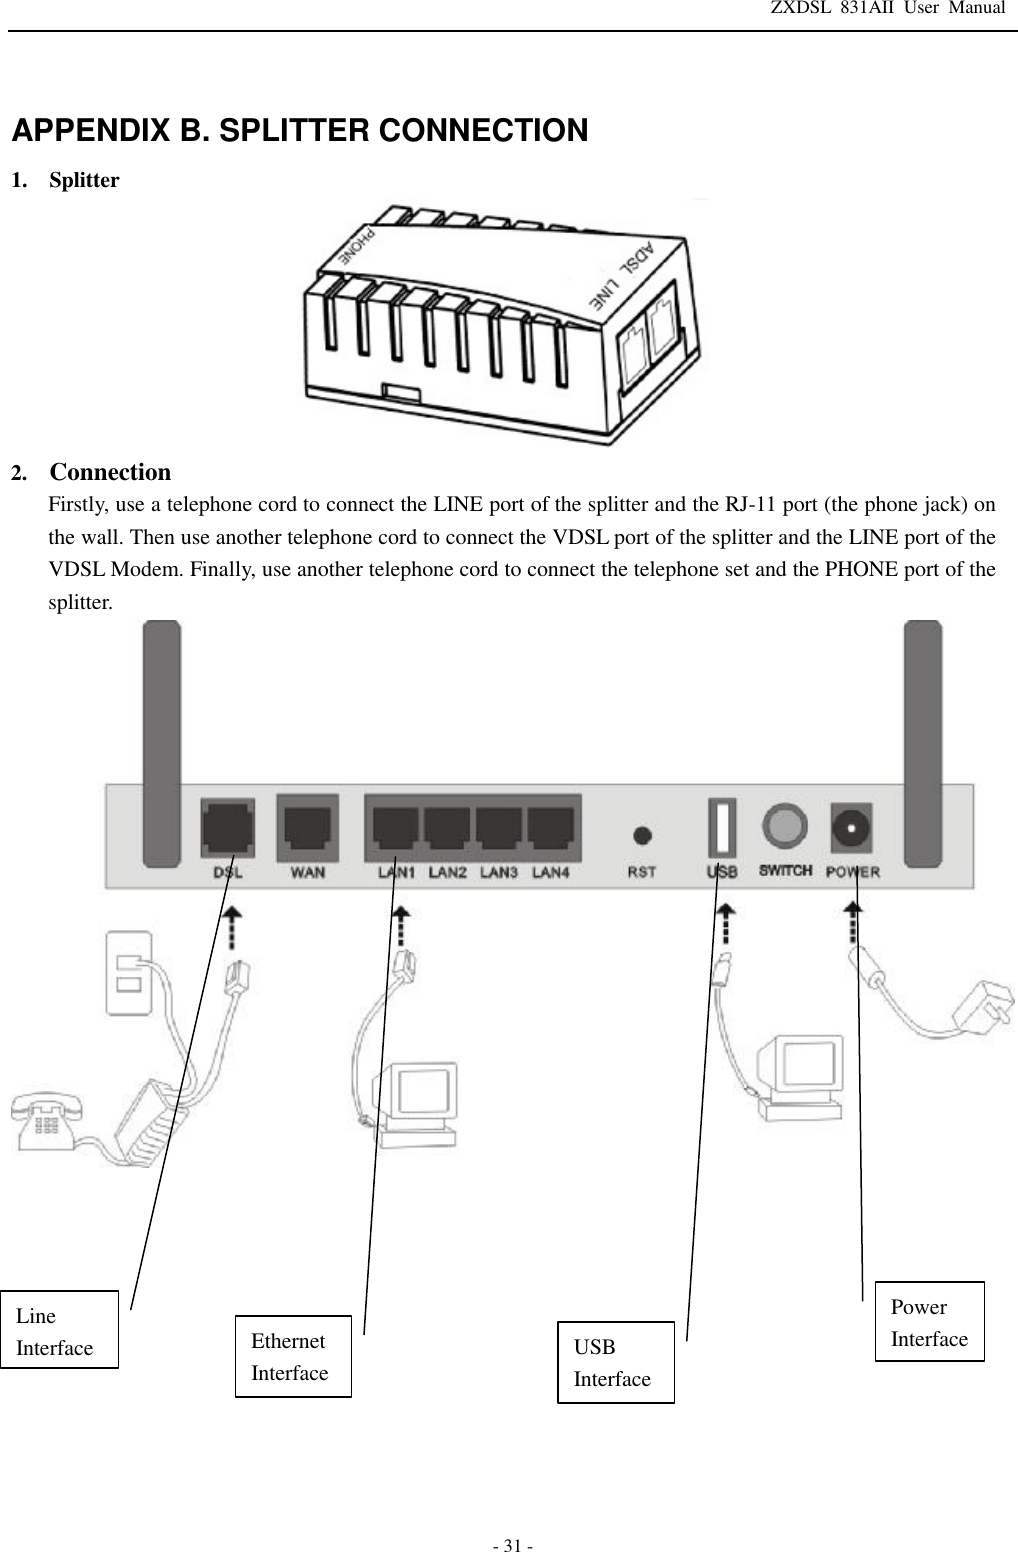 ZXDSL 831AII User Manual  - 31 -  APPENDIX B. SPLITTER CONNECTION 1.  Splitter    2.  Connection Firstly, use a telephone cord to connect the LINE port of the splitter and the RJ-11 port (the phone jack) on the wall. Then use another telephone cord to connect the VDSL port of the splitter and the LINE port of the VDSL Modem. Finally, use another telephone cord to connect the telephone set and the PHONE port of the splitter.             Power Interface Line Interface Ethernet Interface  USB Interface 